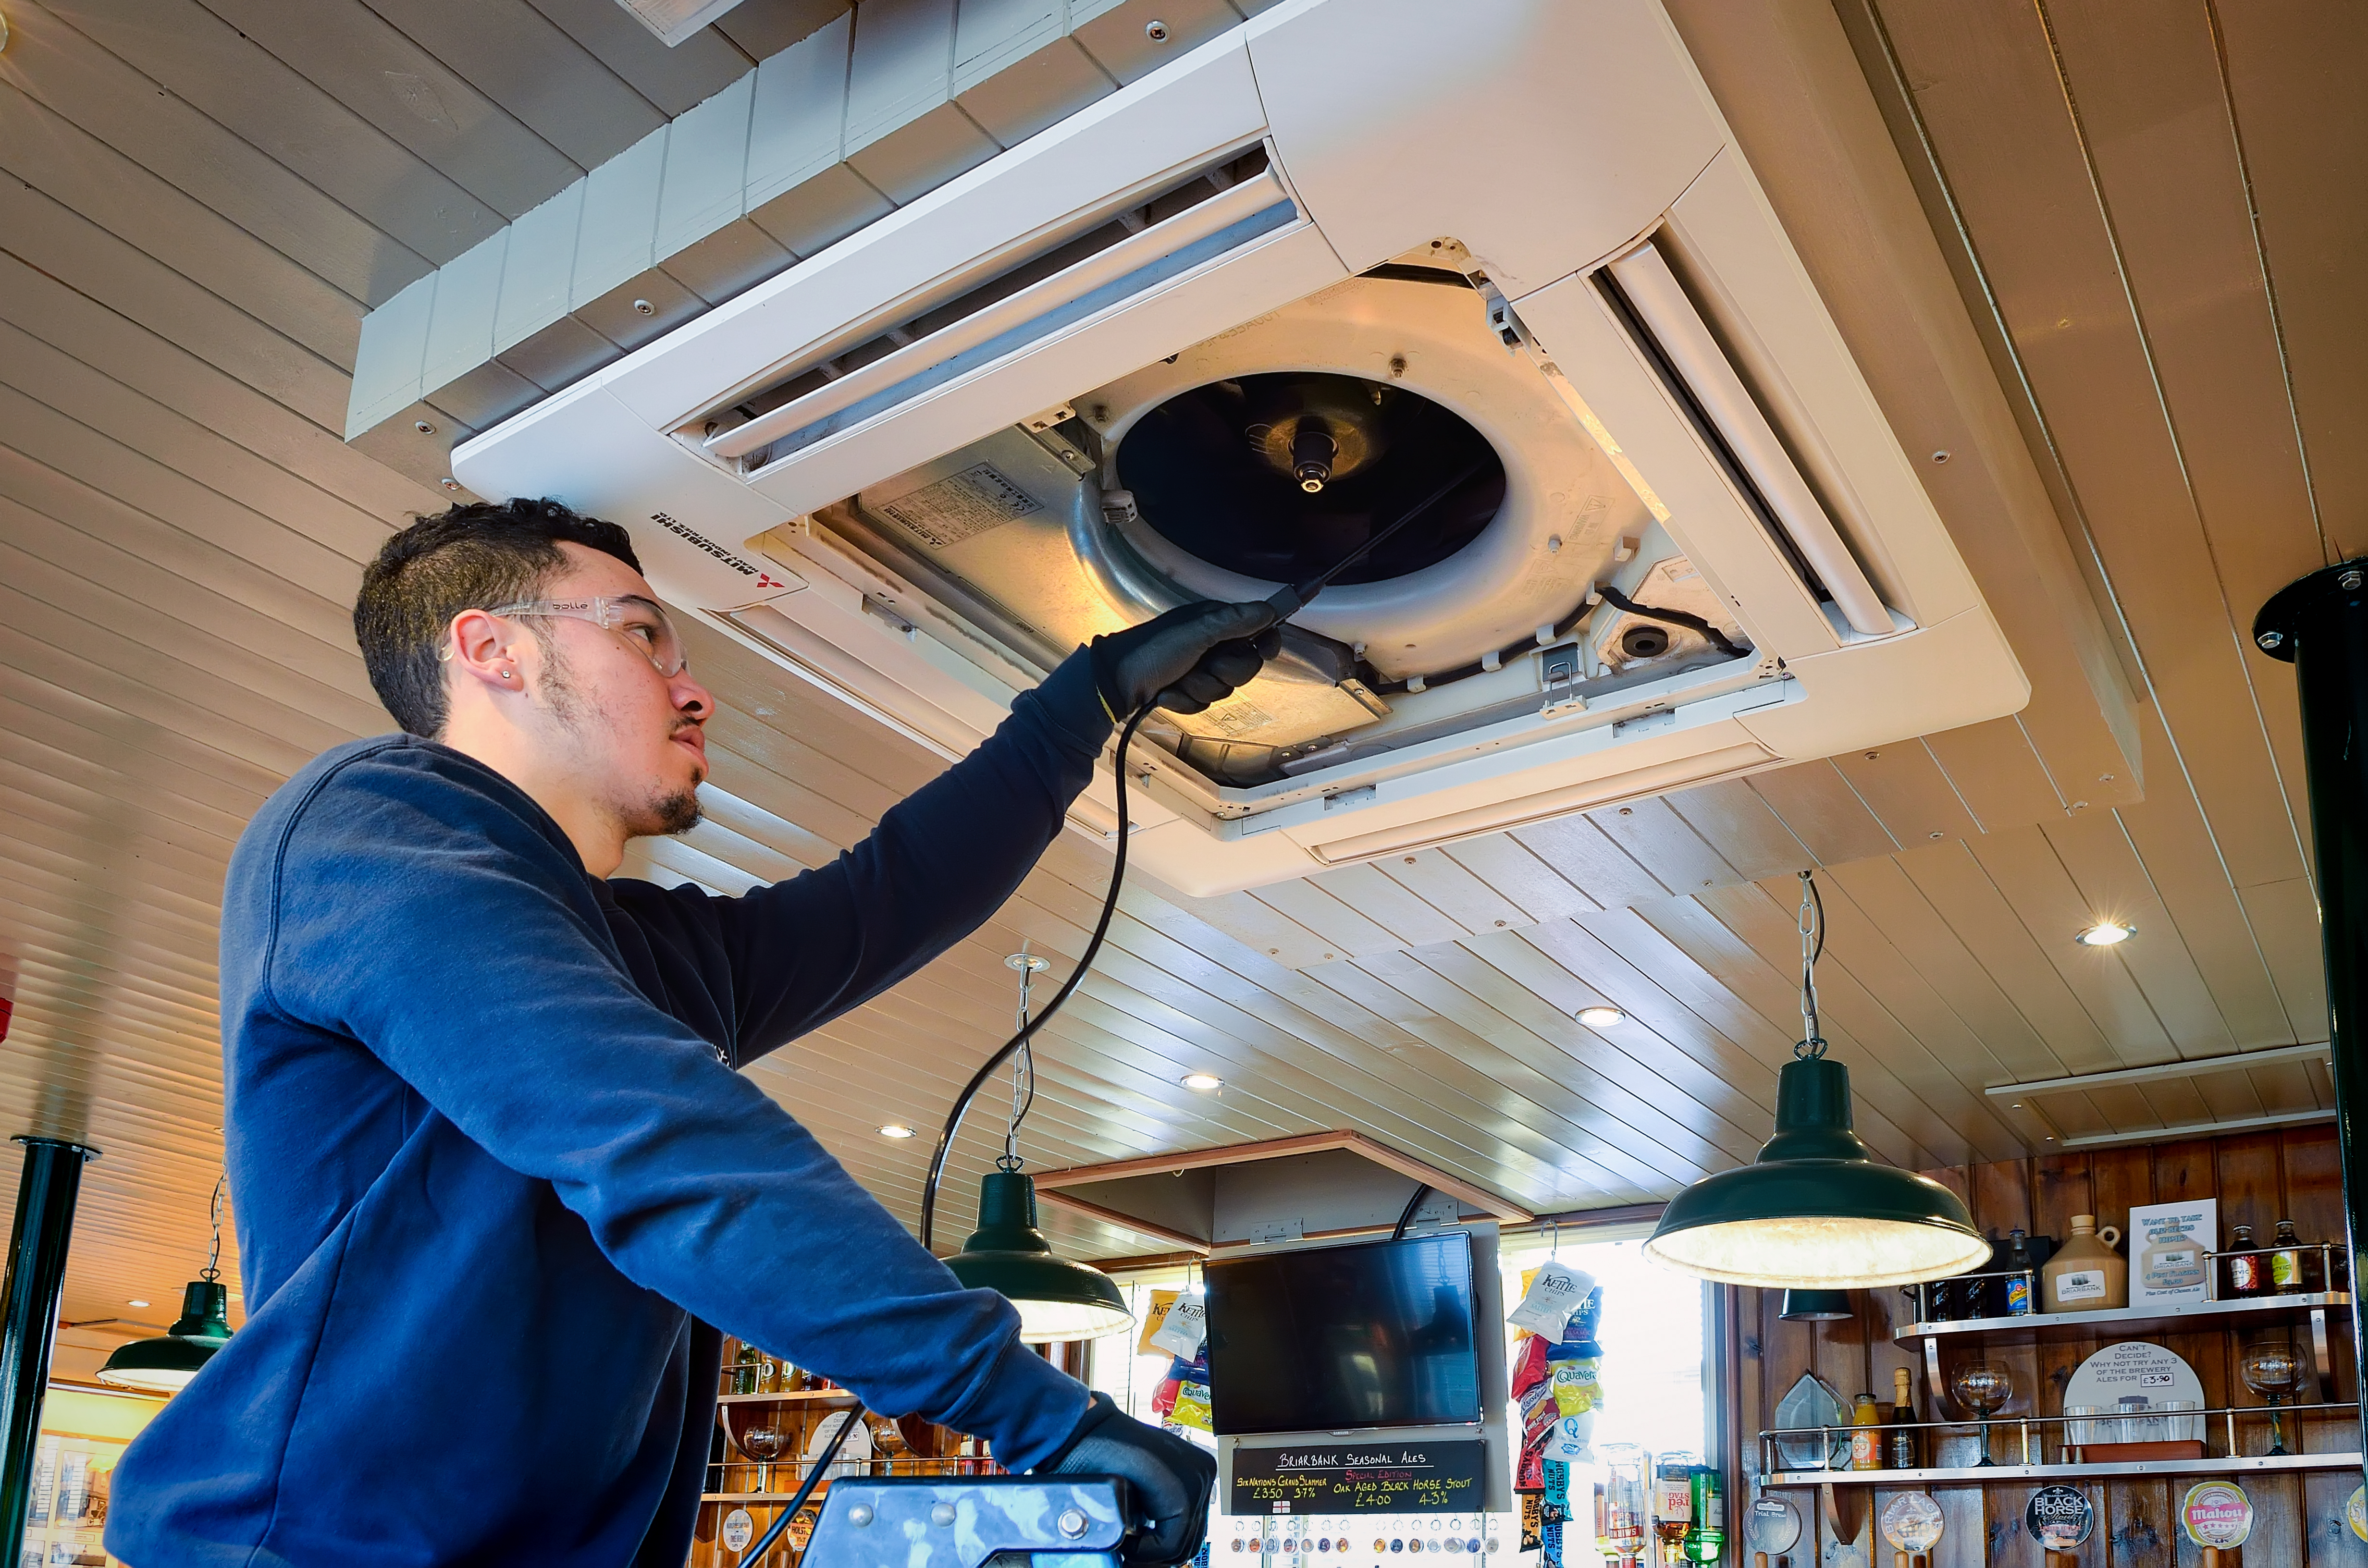 Prevent Costly Repairs With Air Conditioning Services From Welch Refrigeration In Suffolk And Essex